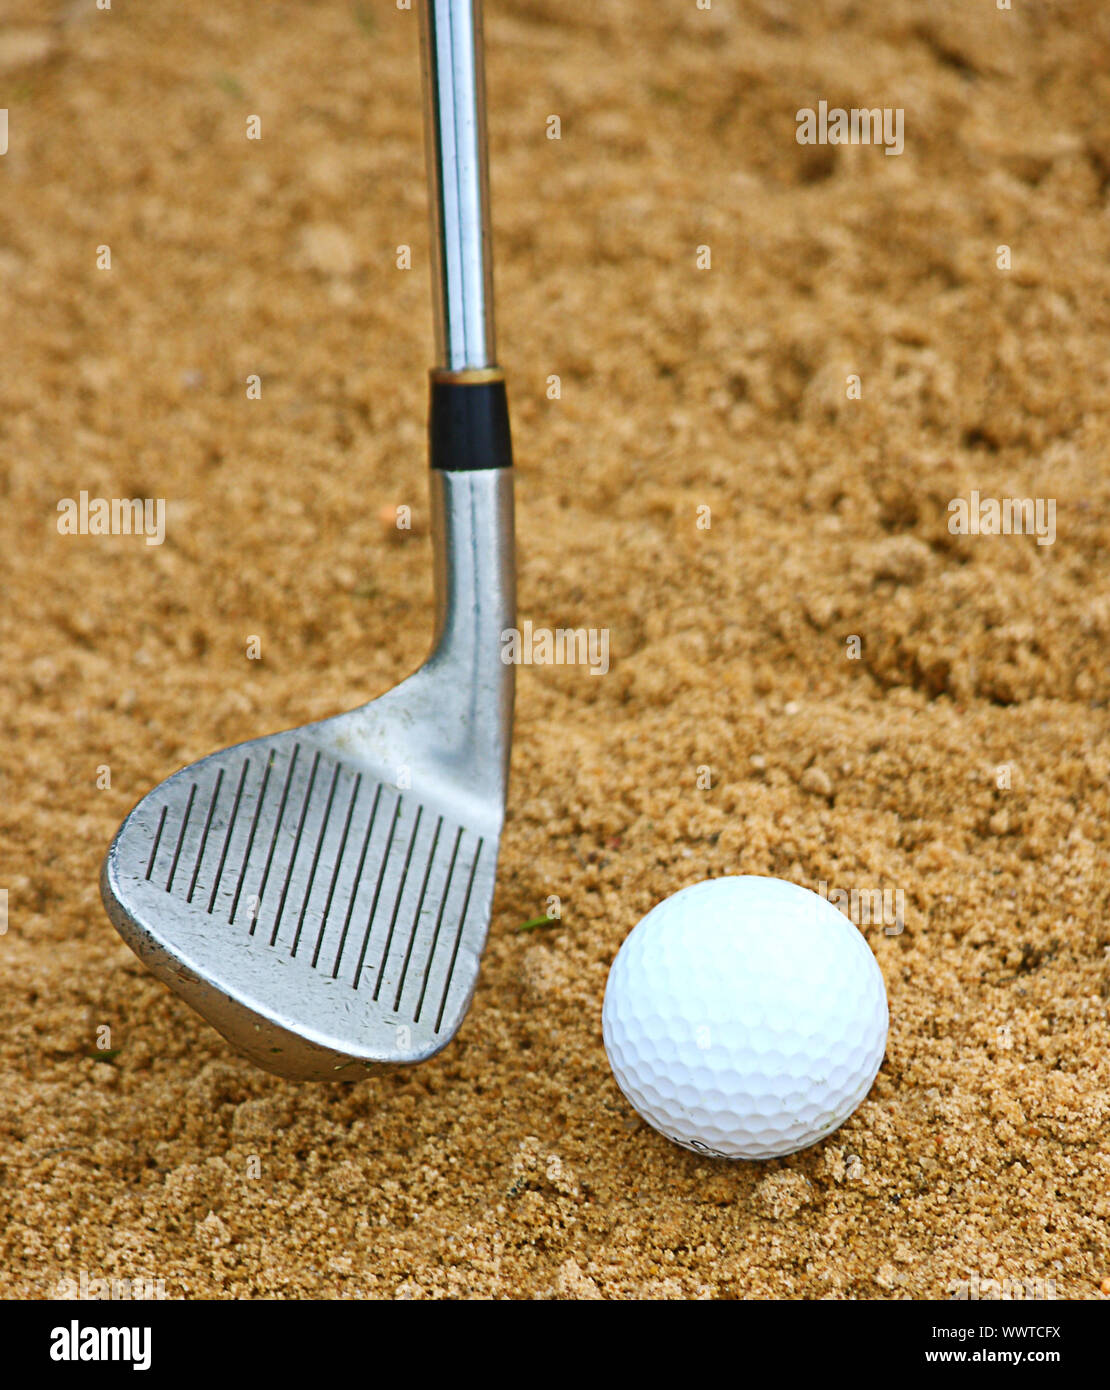 Hitting A Golf Ball Out Of A Bunker Using A Sand Wedge Stock Photo